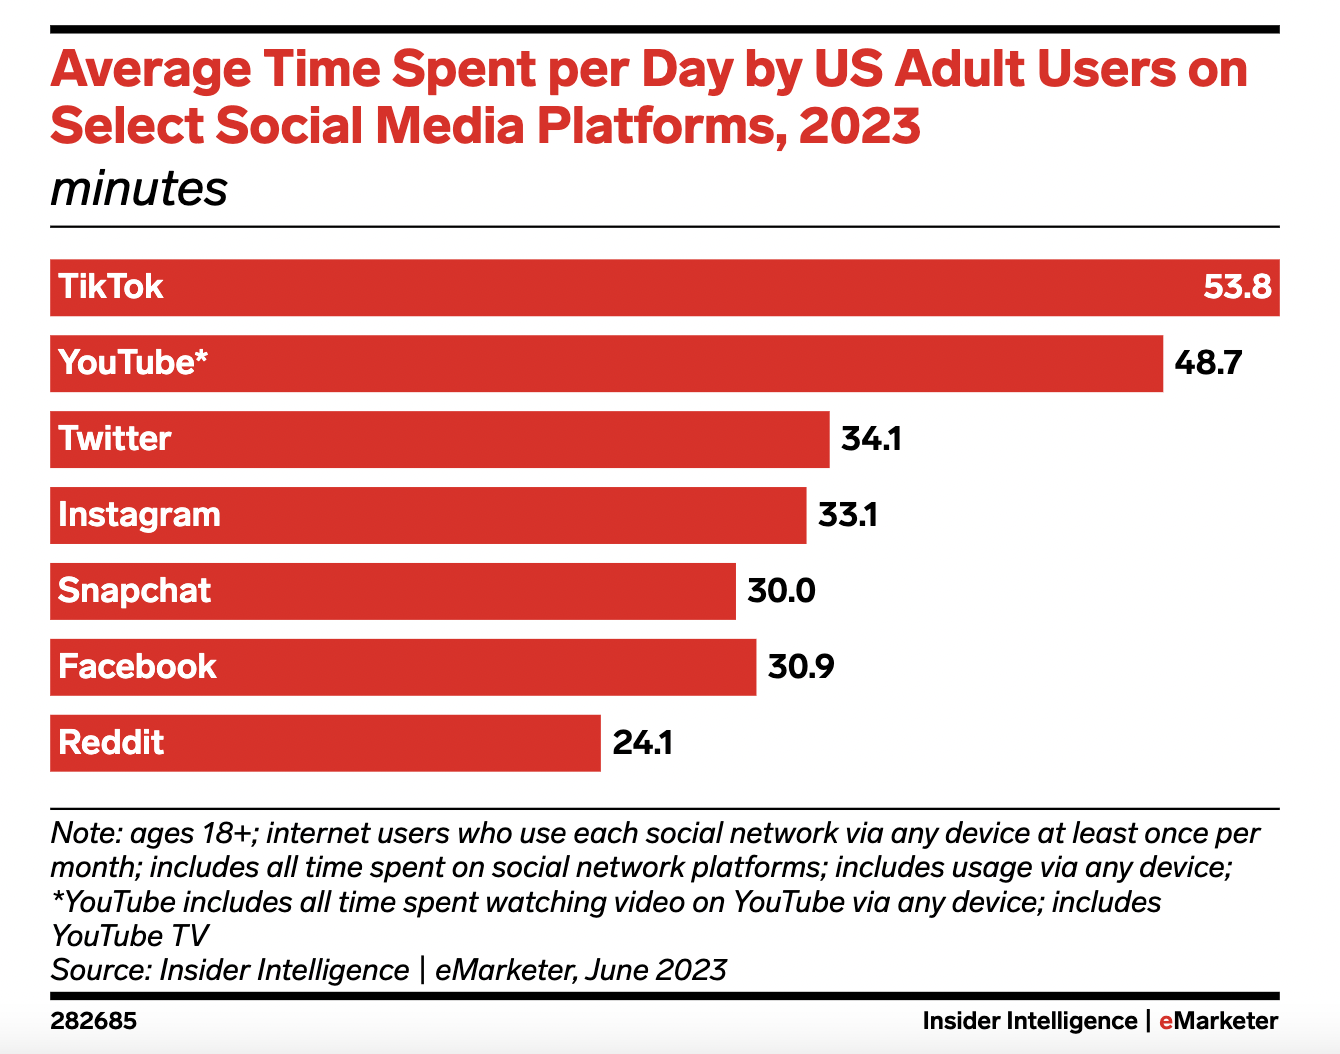 A bar graph showing the average daily time spent on various social media platforms in 2023, in descending order, starting with TikTok (53.8 minutes), YouTube (48.7 minutes), Twitter (34.1 minutes) and Instagram (33.1 minutes).